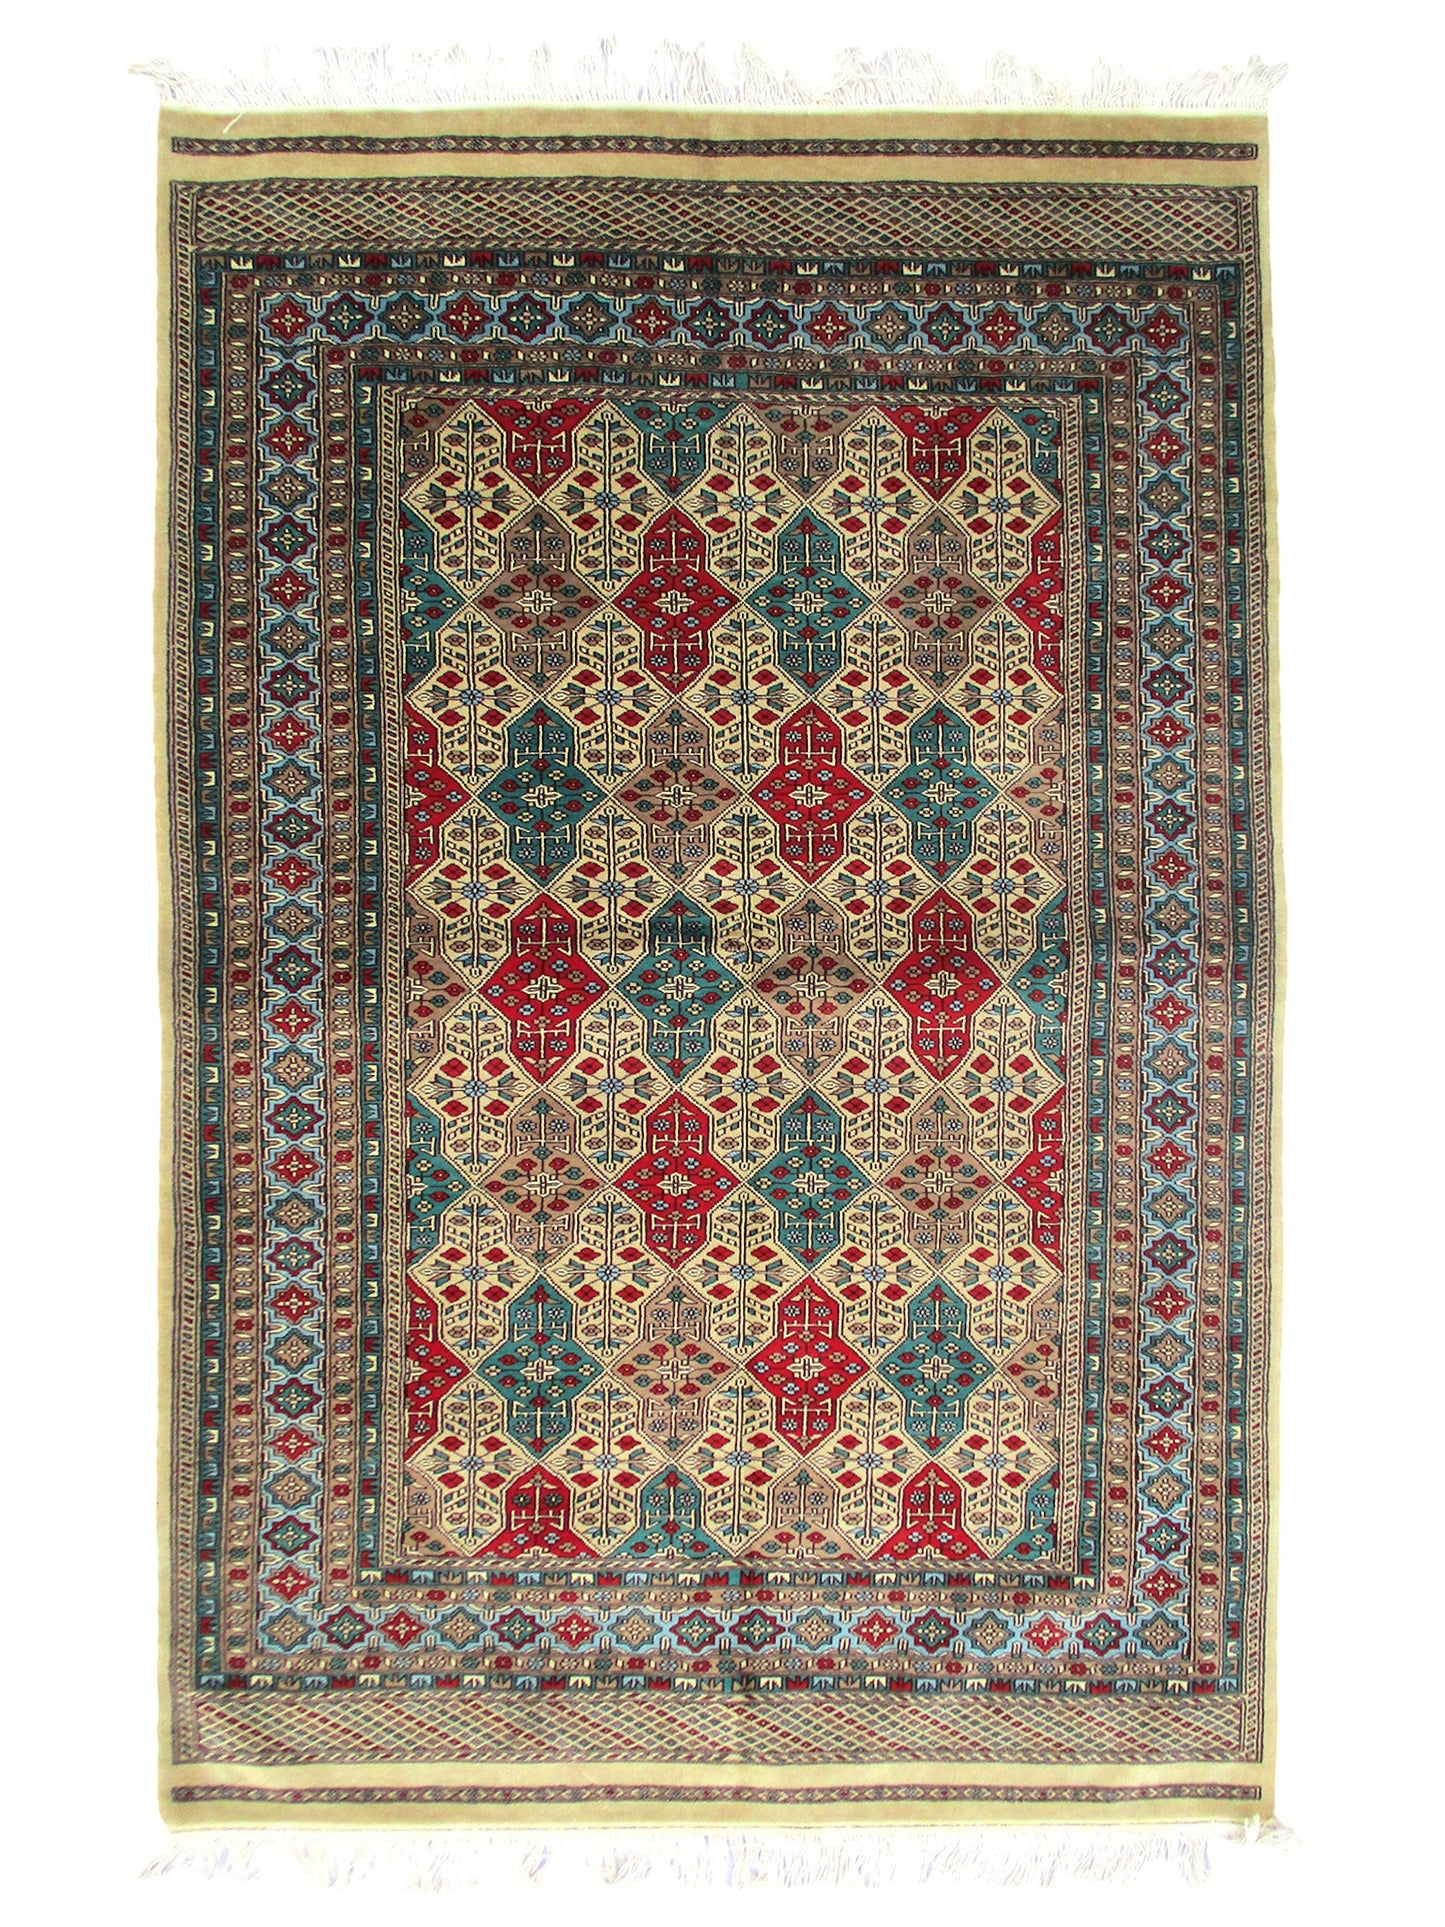 4 x 7 Feet Multi Color Turkish Caucasian Rug | Hand Woven Wool & Silk | Oriental Persian Pattern With Thick Blue Red Green Border Soft Pile